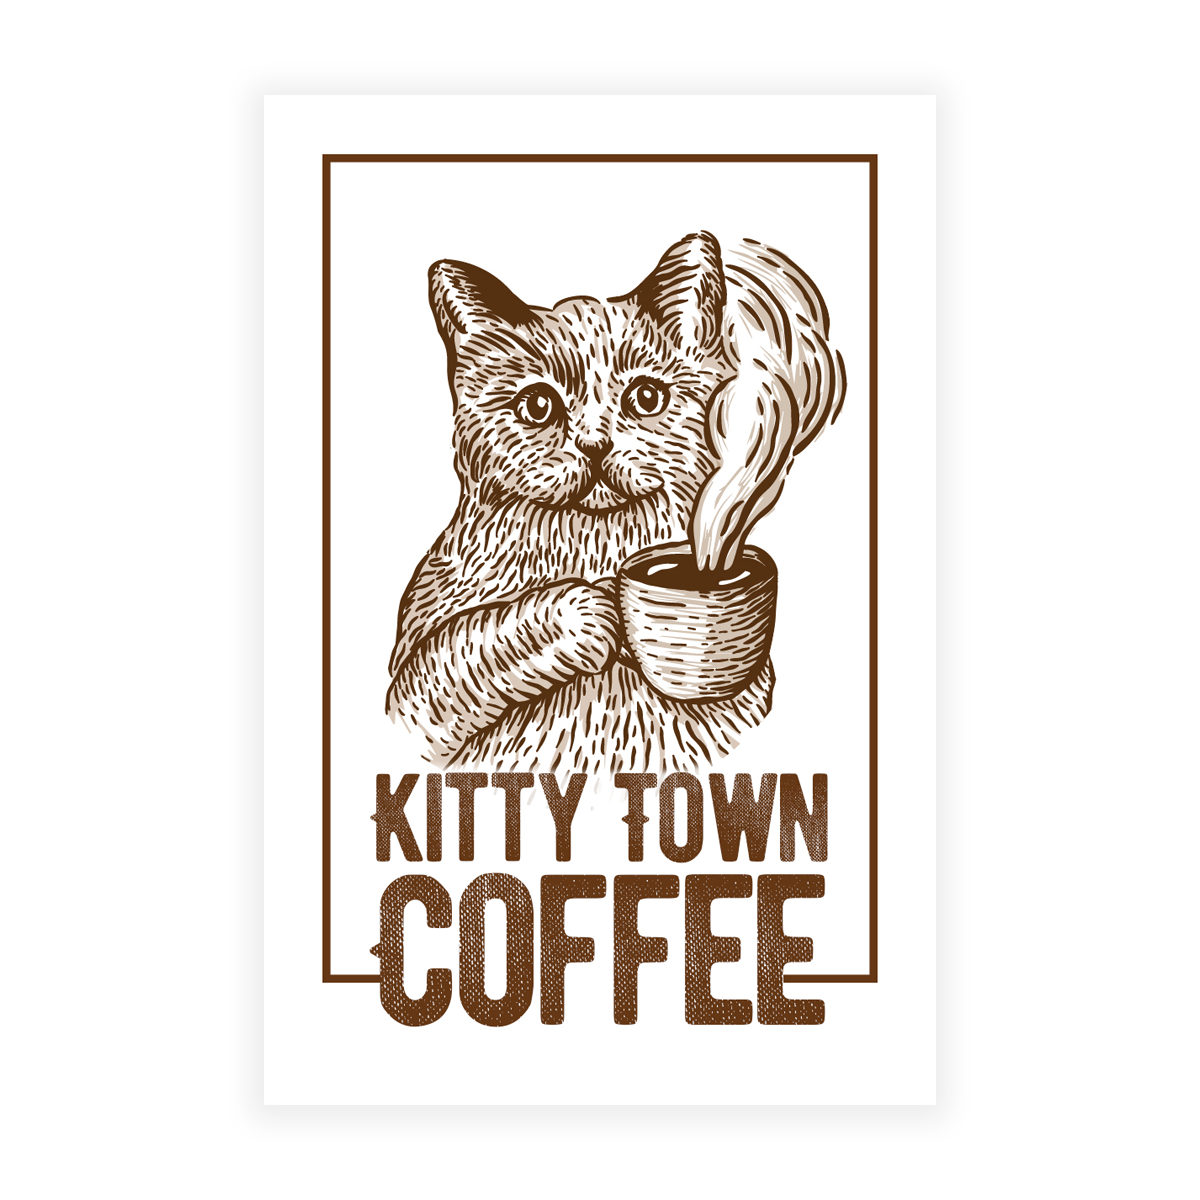 Kitty Town Rectangle Magnet